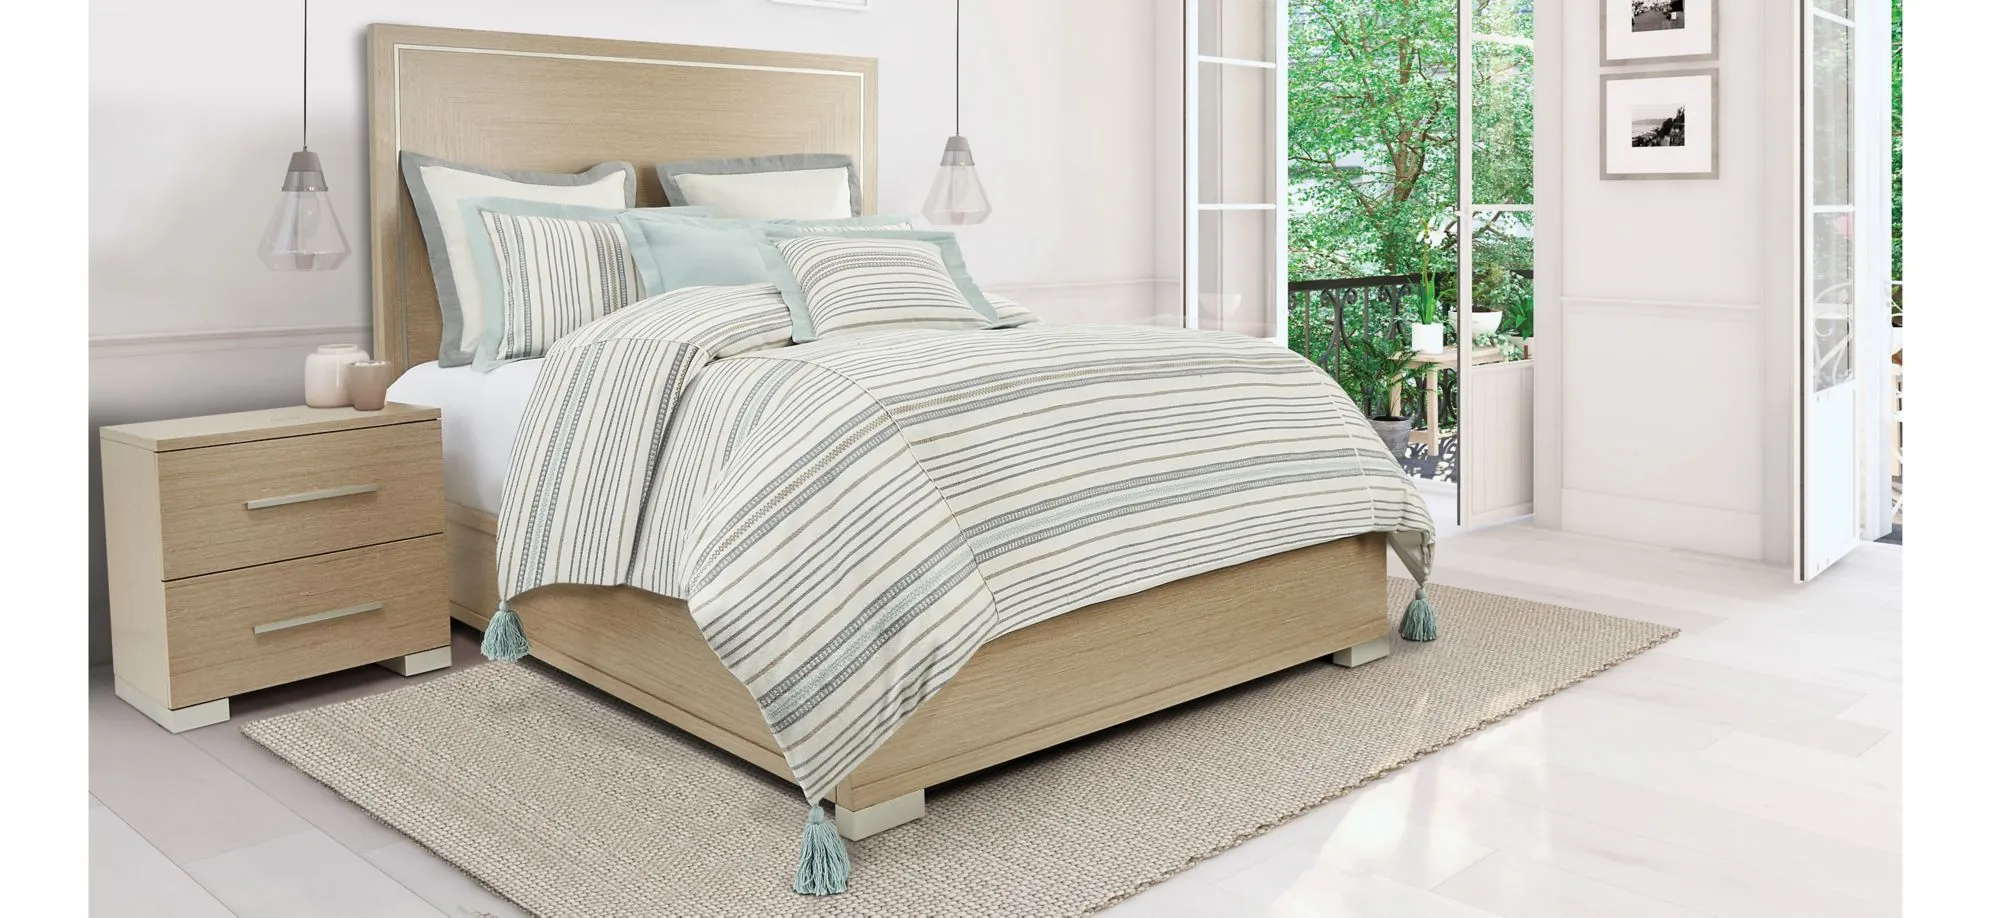 Max 7-Piece Duvet Set in Natural, Tan, Gray, Silver, Green, Blue, Gold by Amini Innovation